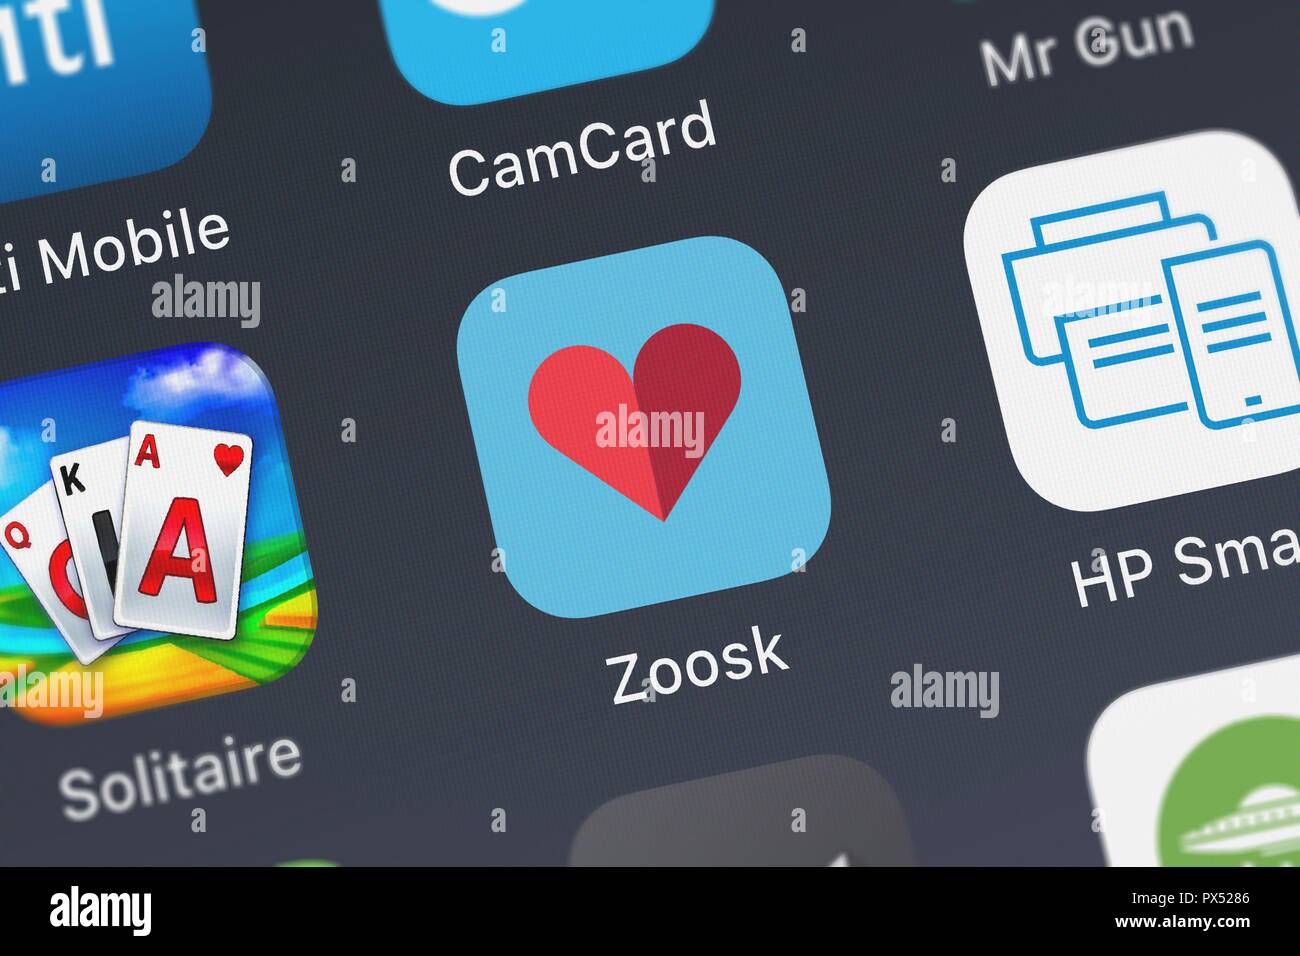 Zoosk dating apps